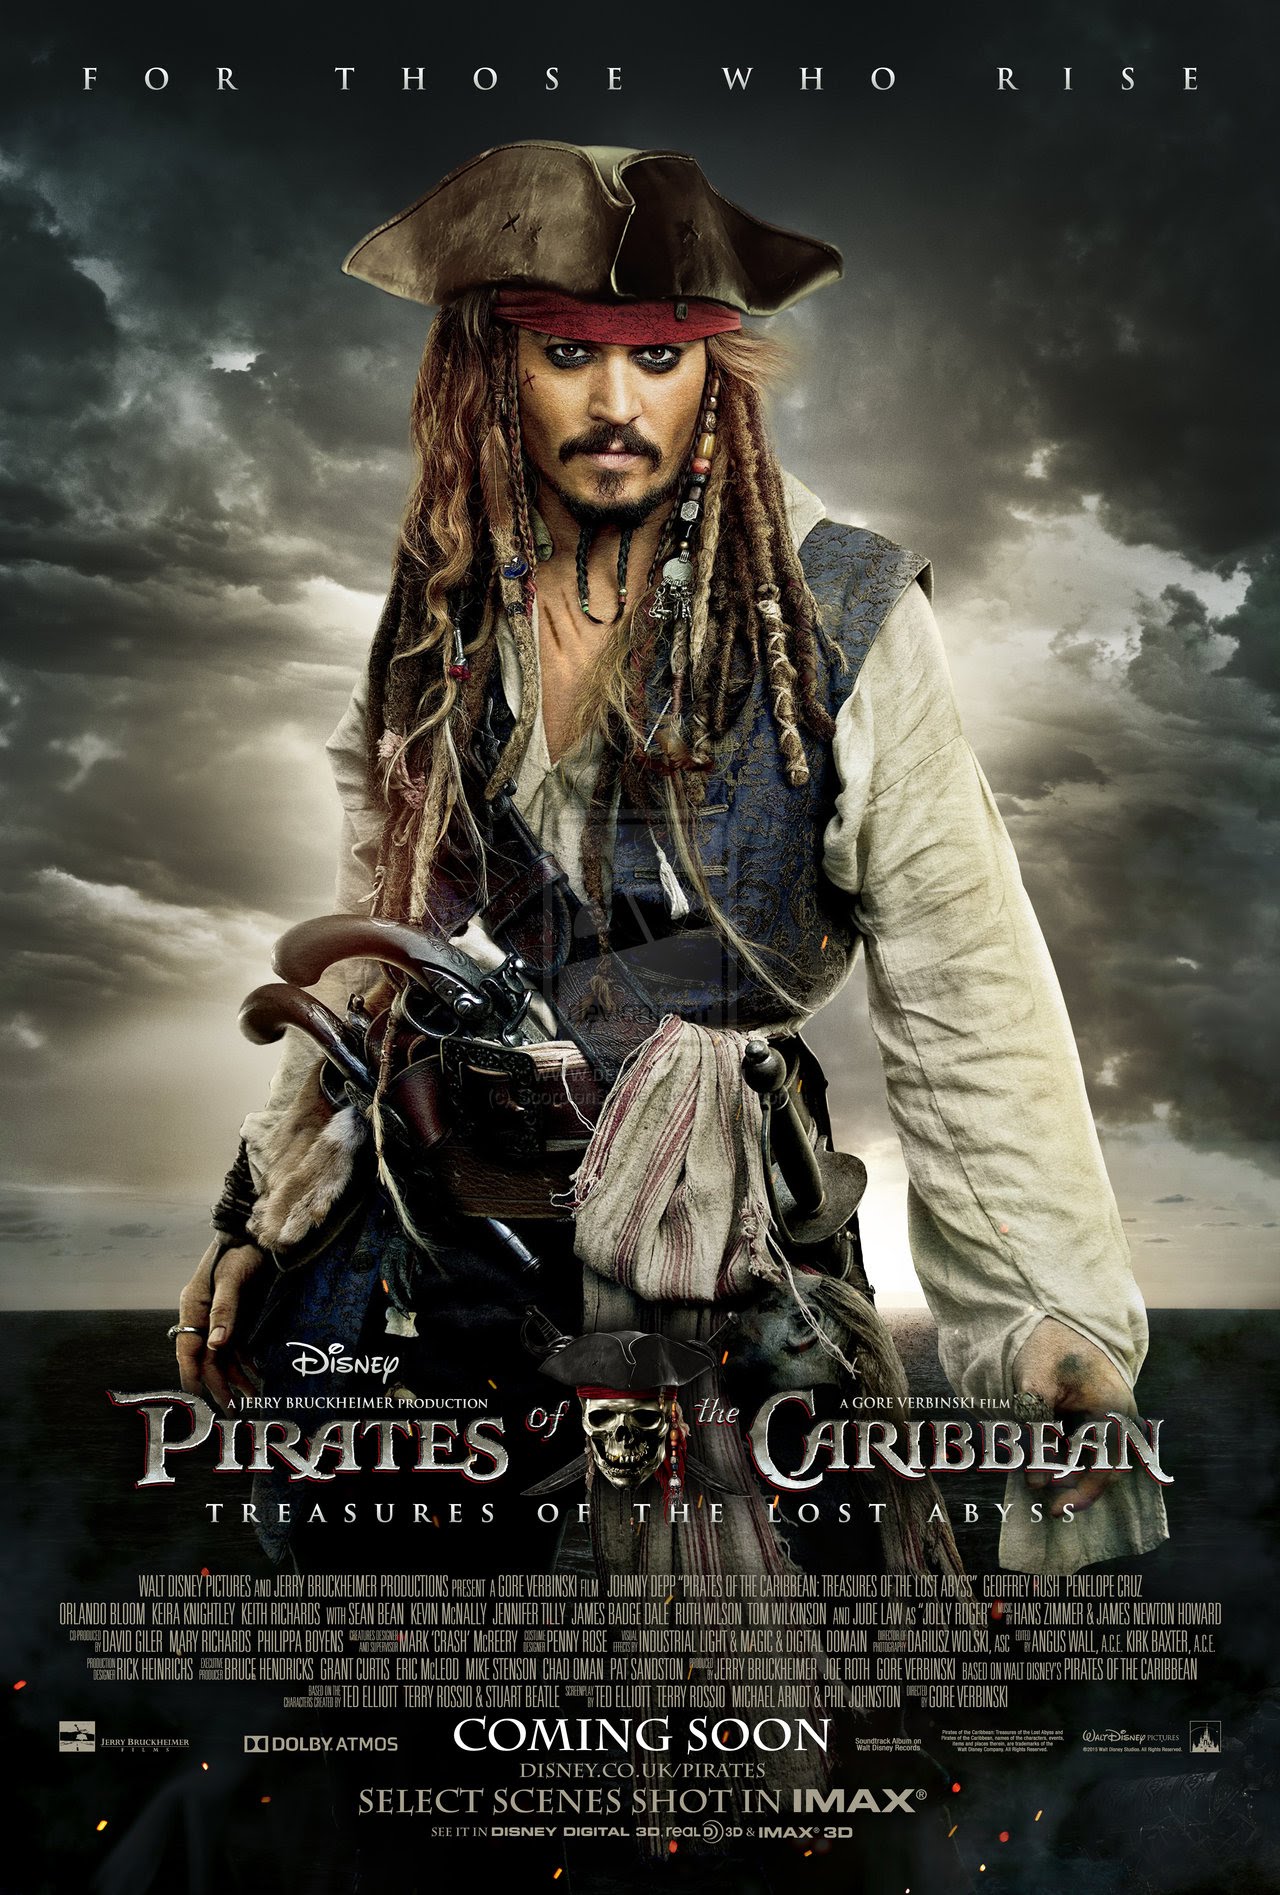 Watch Trailer of new film of series “Pirates of the Caribb